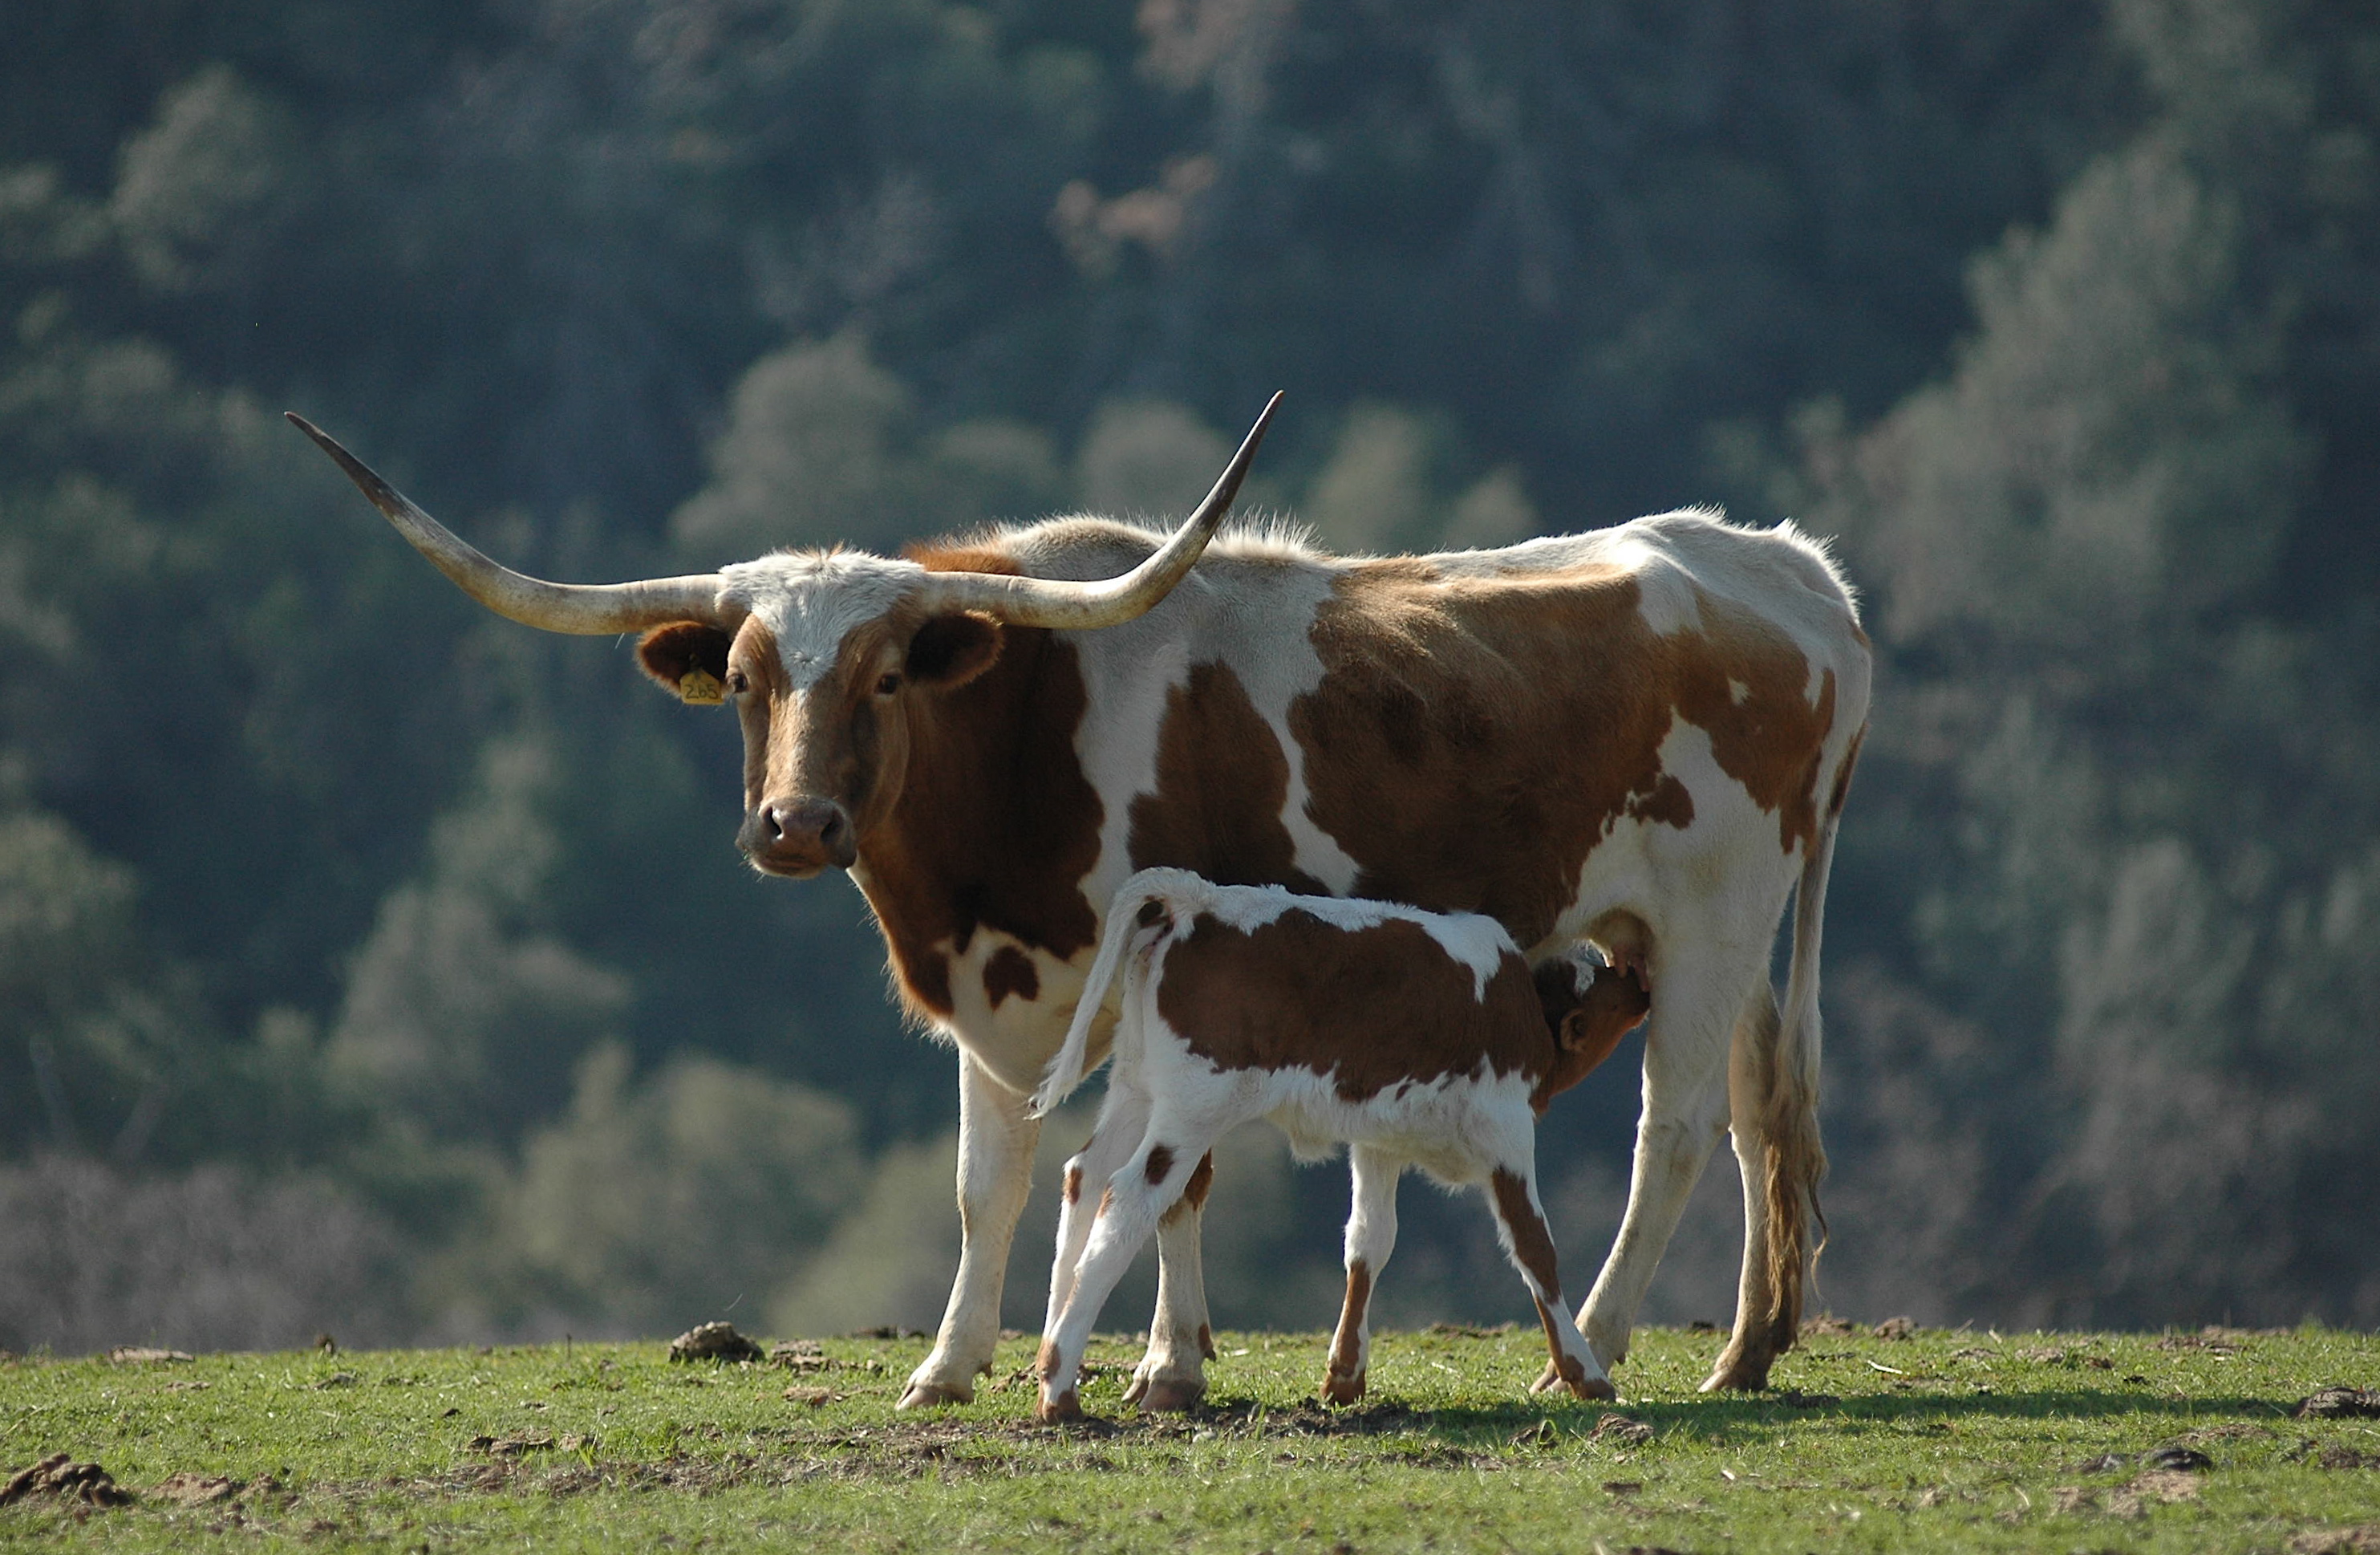 Longhorn Cattle Sighting at the Ranch